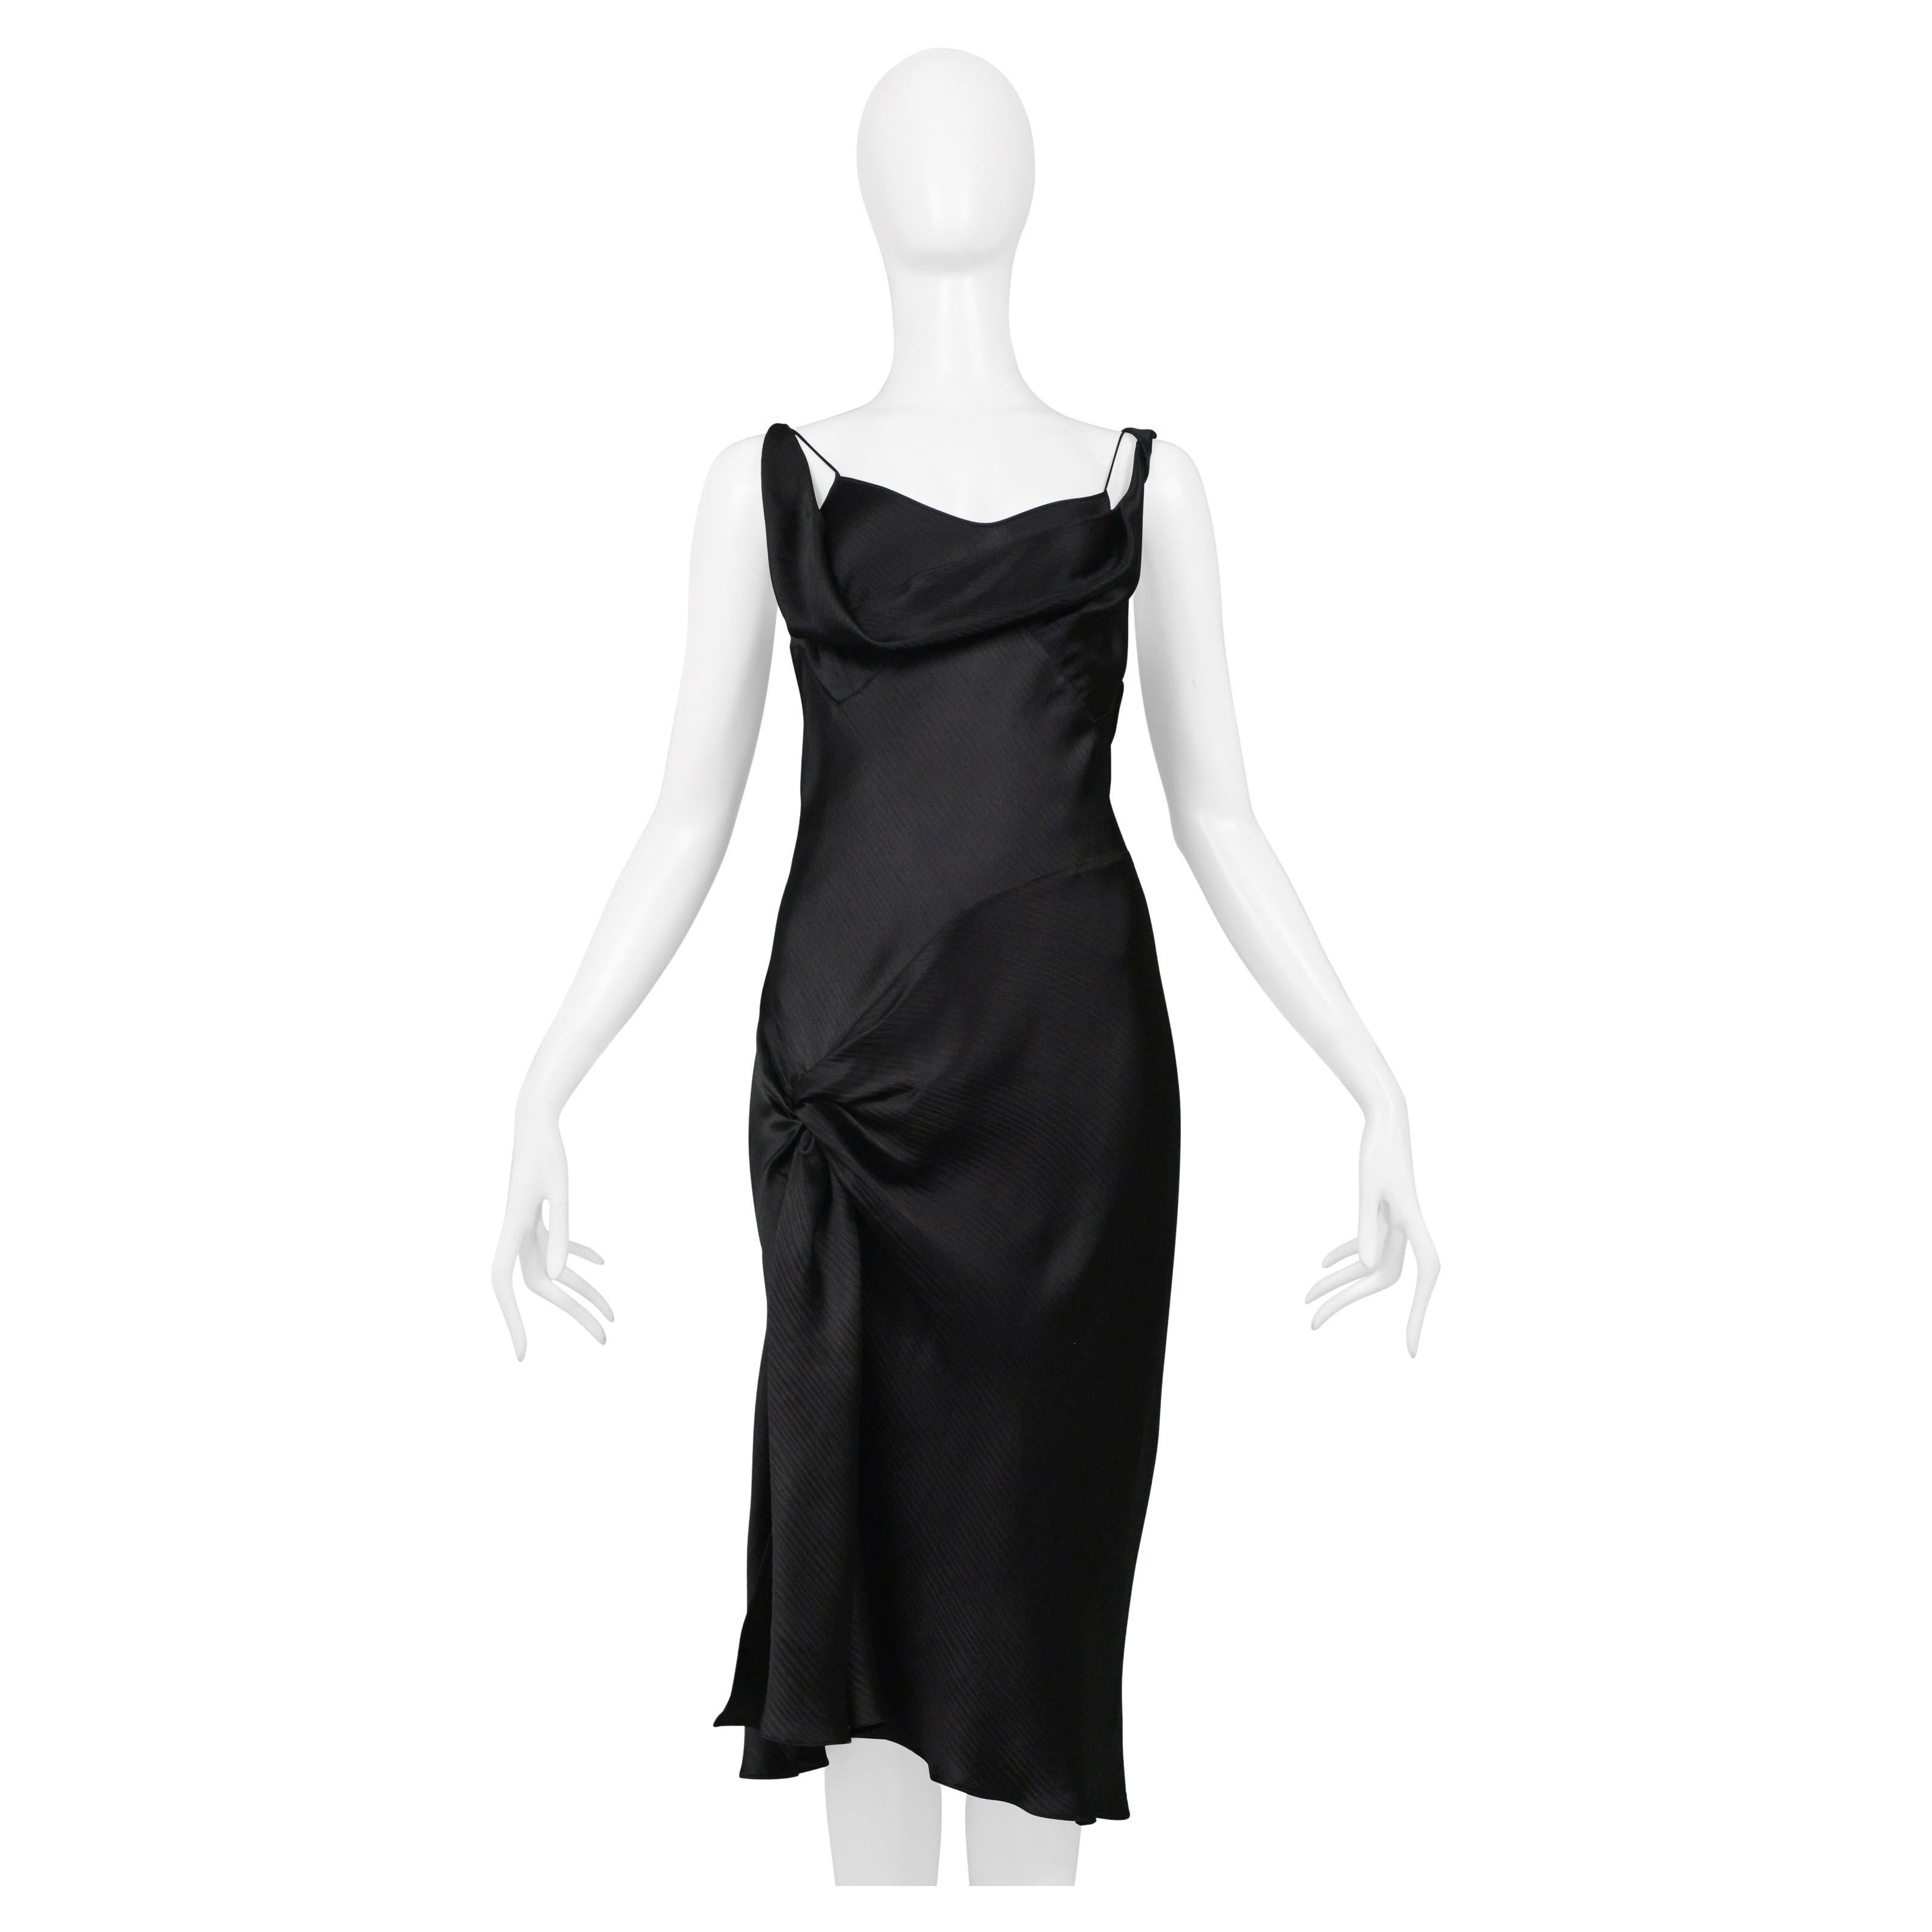 Stunning John Galliano Black Satin Slip Dress with Hip Knot and Slit 1990s For Sale